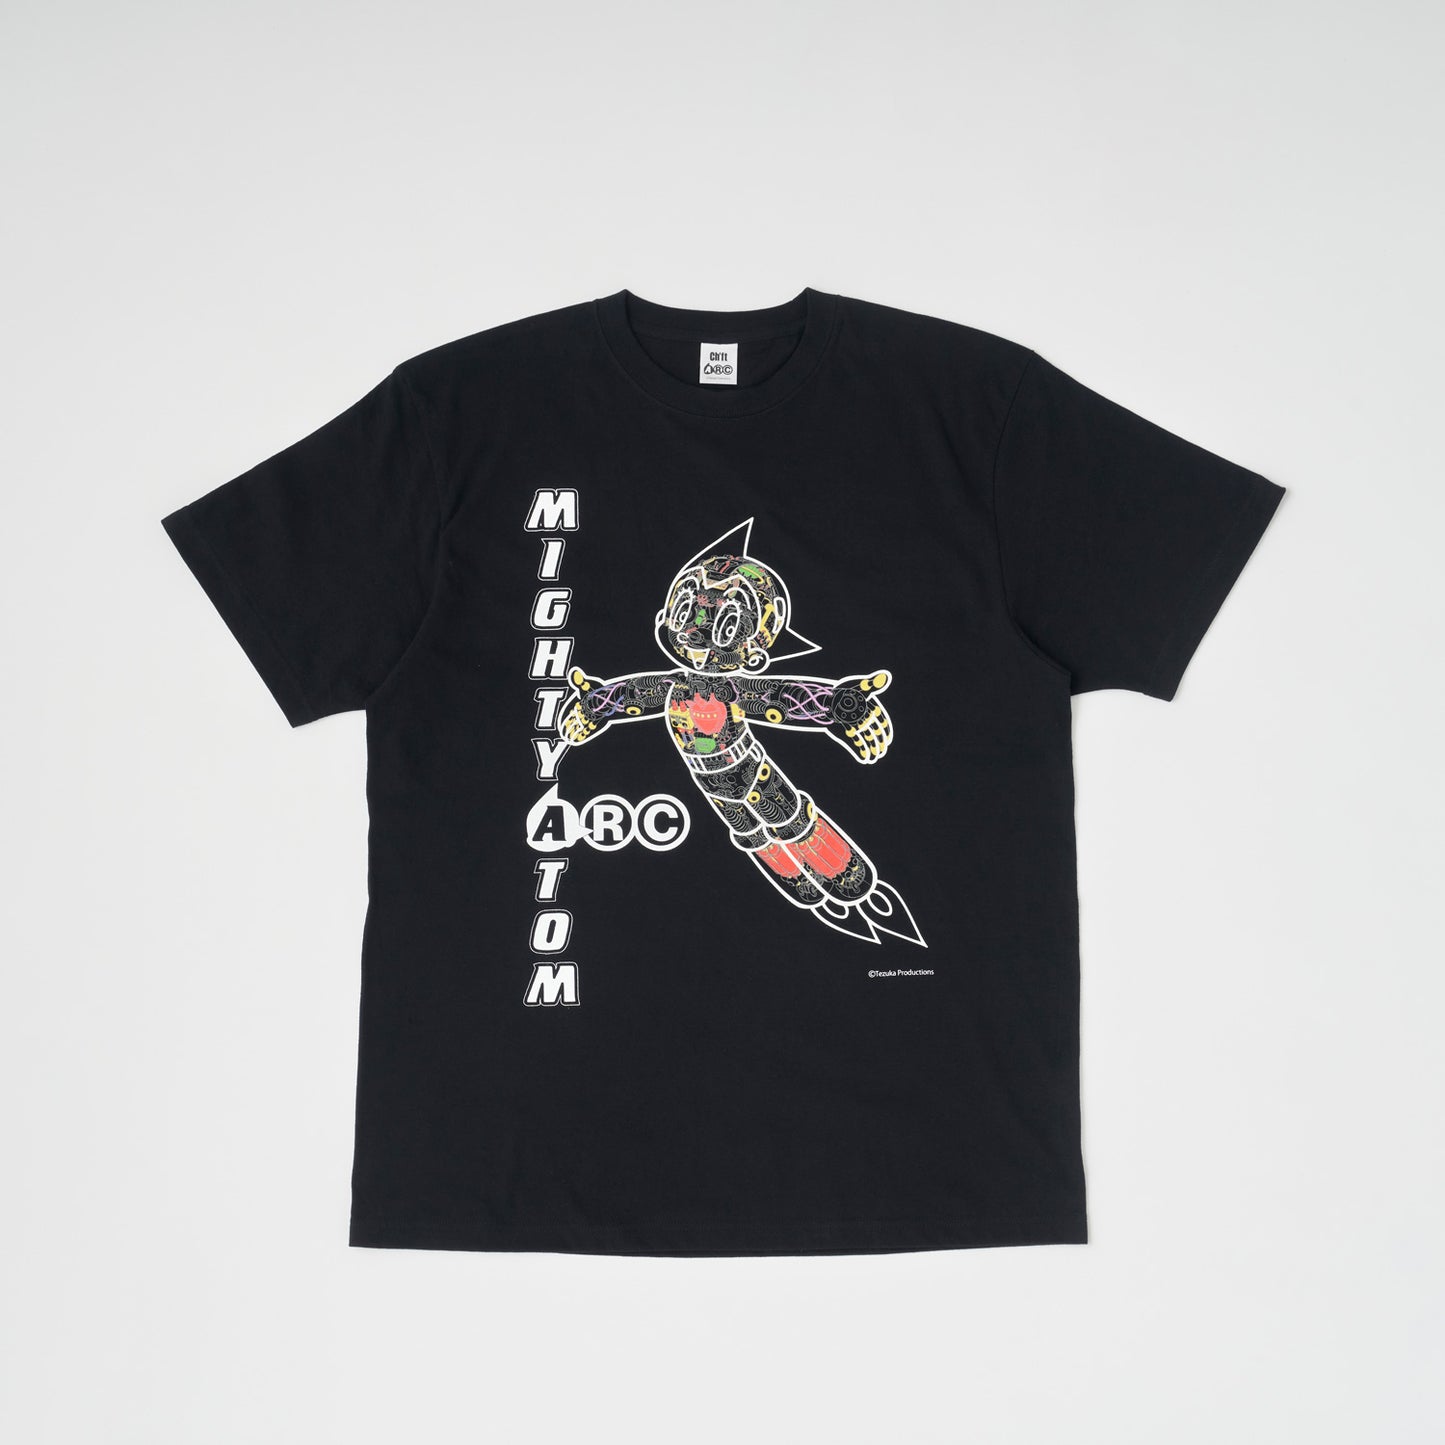 ＜ARC＞OPEN HEART MIGHTY ATOM　フルスケルトンTシャツ